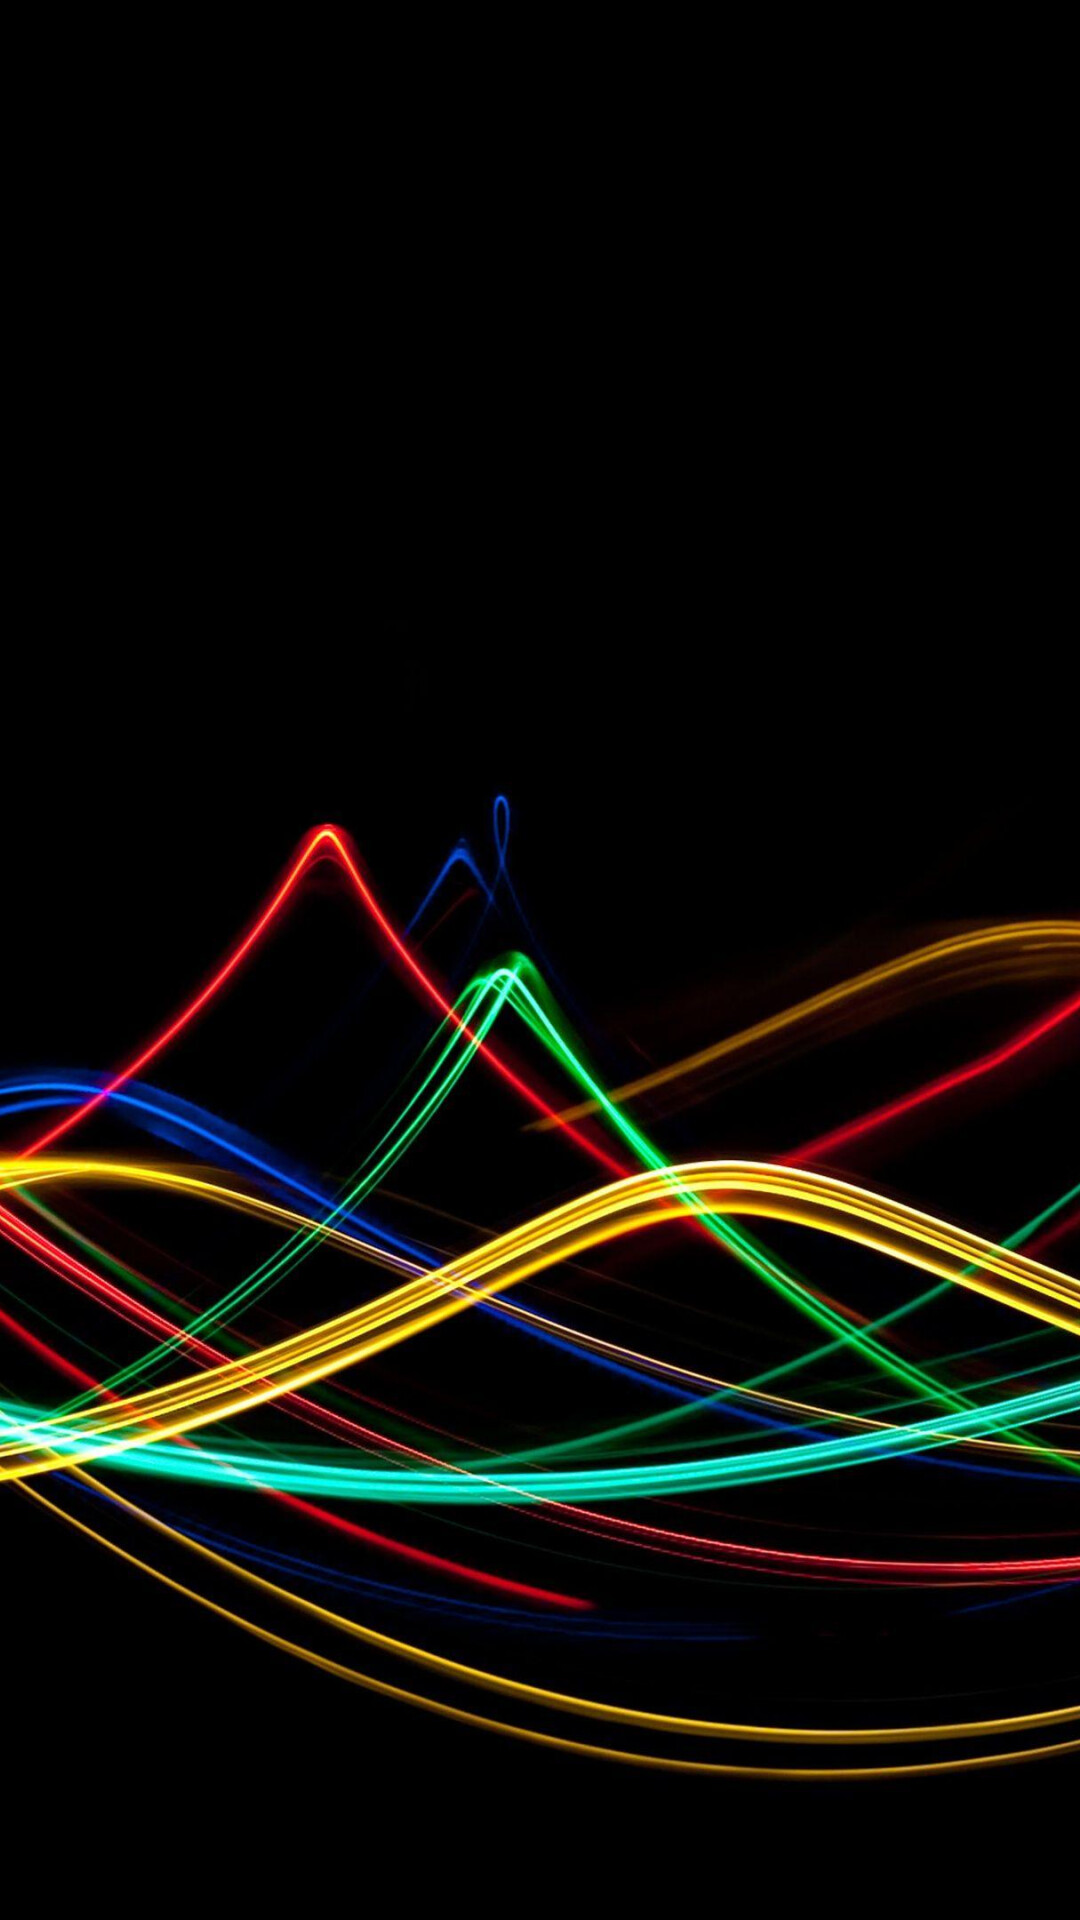 Glow in the Dark: Visual effect lighting, Neon lines and waves, Abstract. 1080x1920 Full HD Background.